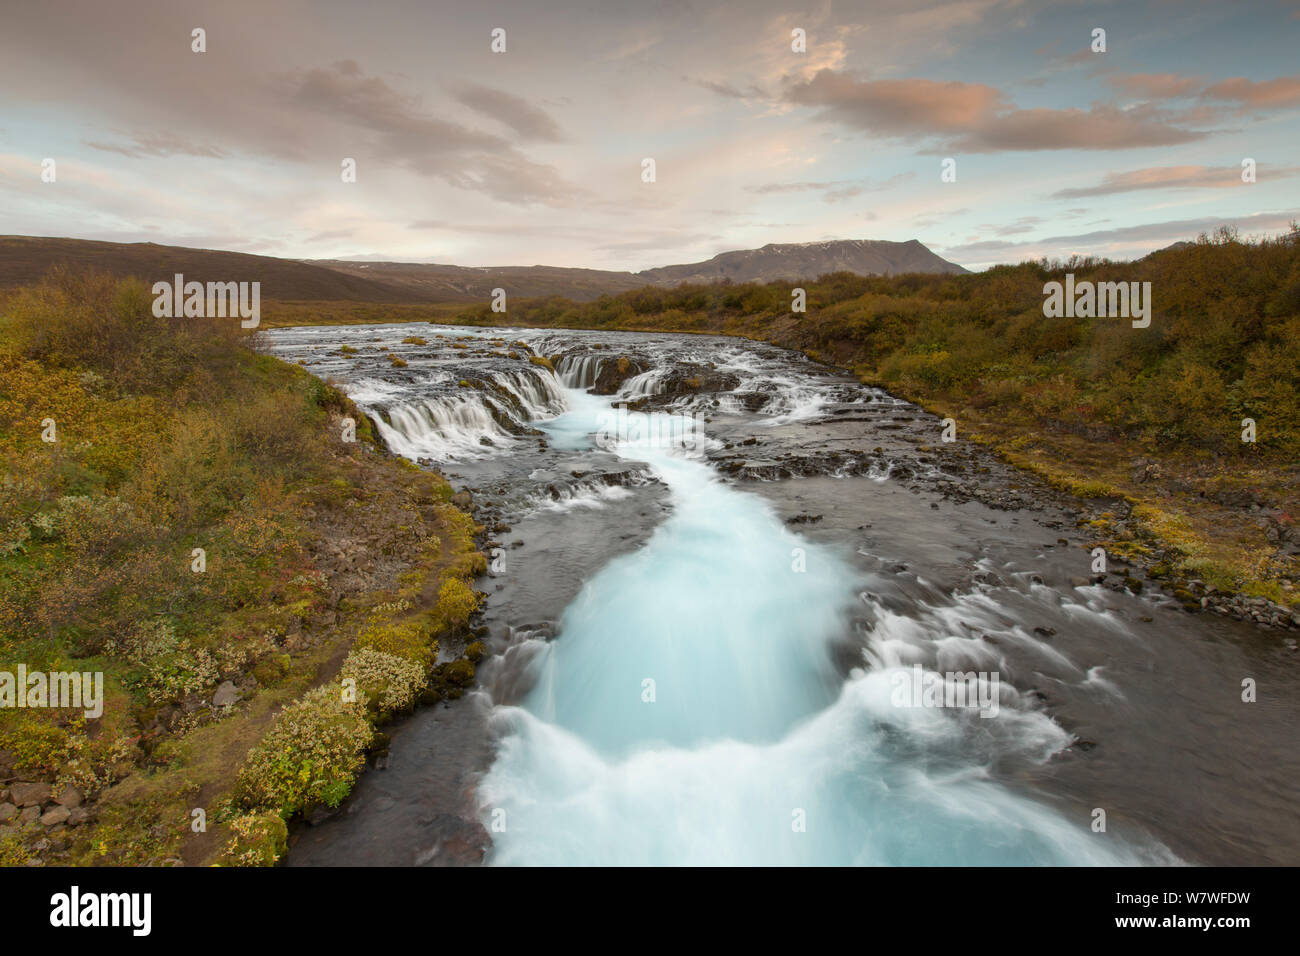 Bruarfoss waterfall at dawn with rapids, Iceland, September 2013. Stock Photo